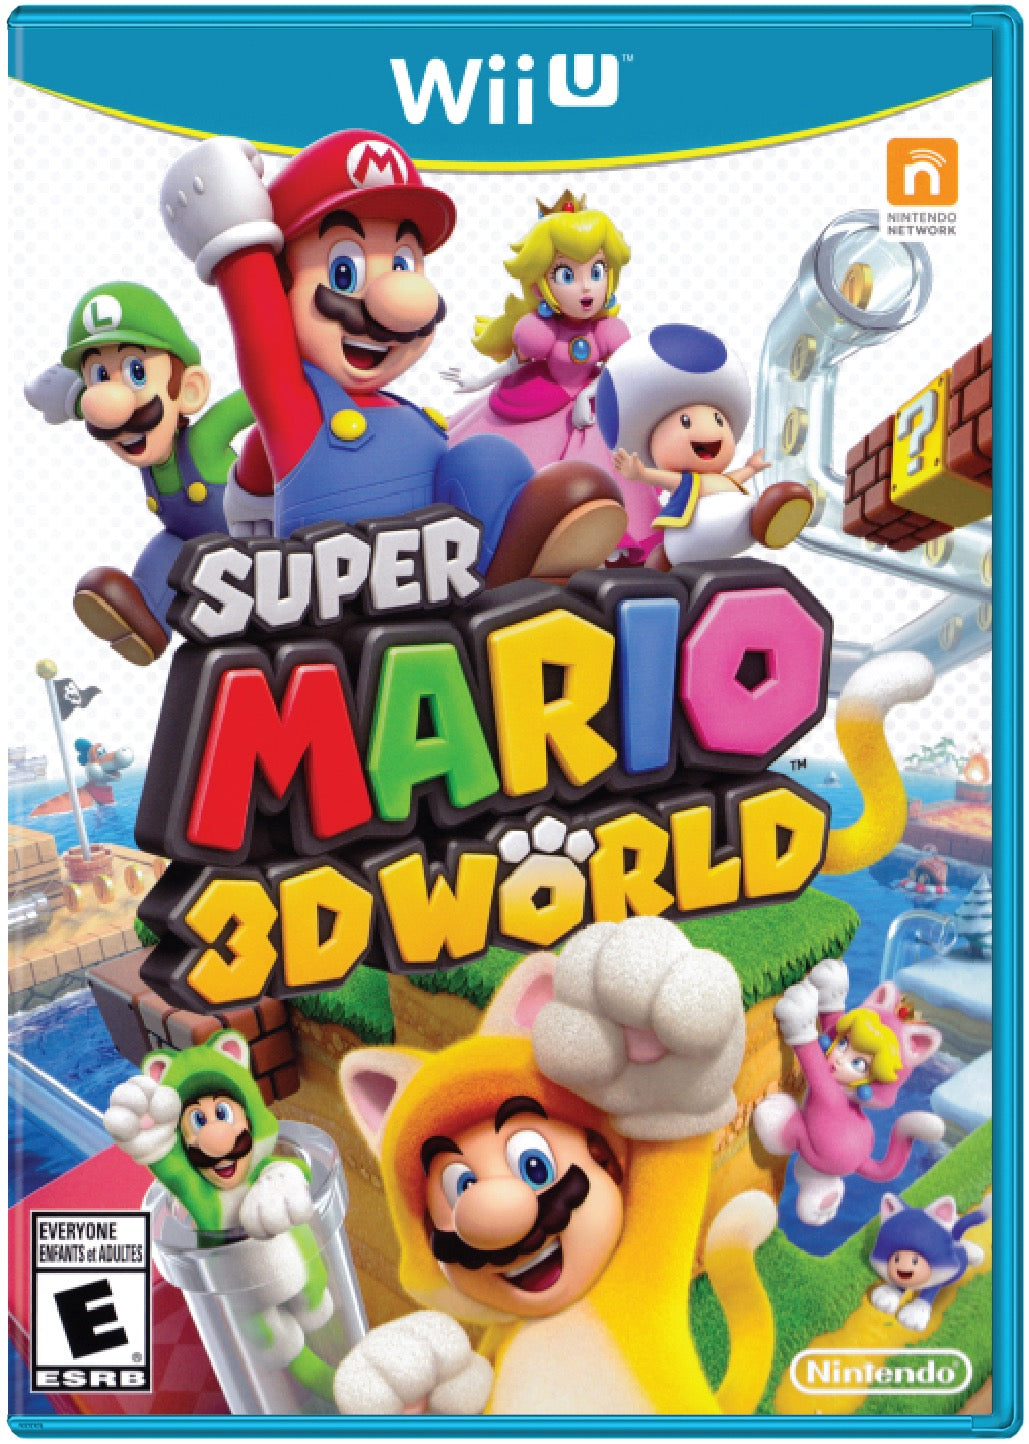 Super Mario 3D World Cover Art and Product Photo